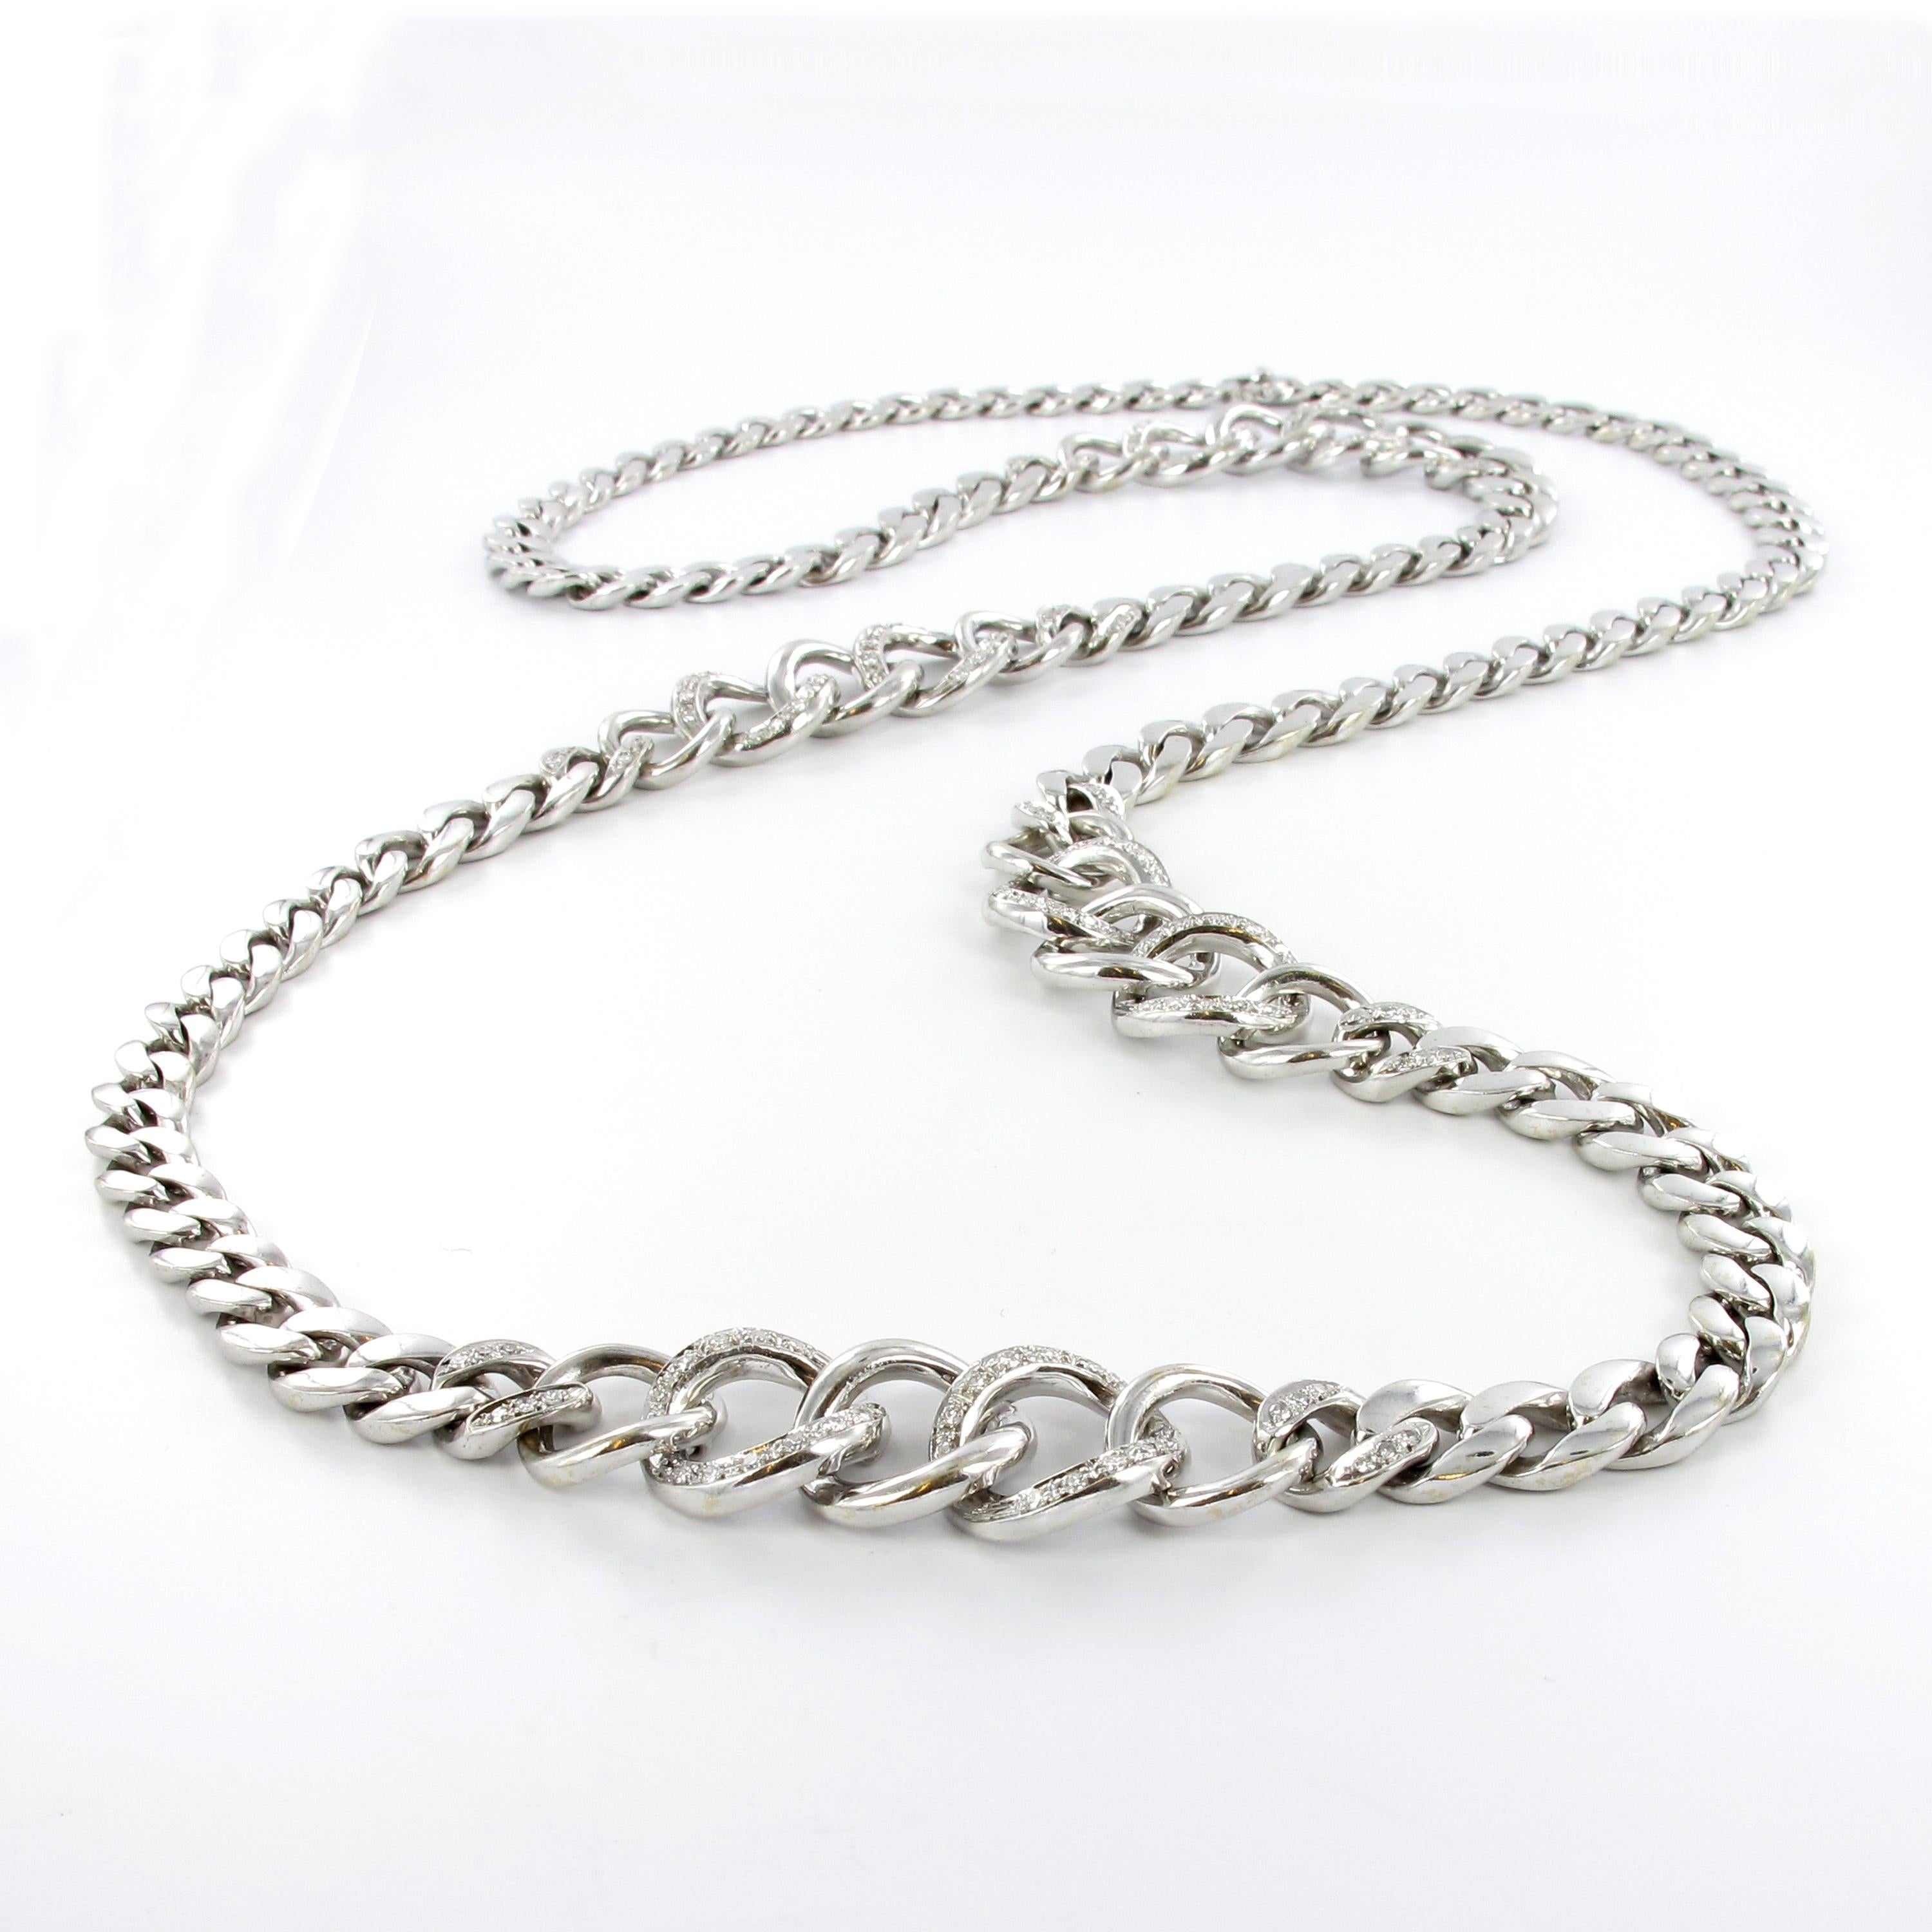 This modern 18 KT White Gold Sautoir can be used in many ways, whether with a little black dress, or with Jeans and T-shirt it adapts to the occasion. You can also try wearing it wrapped around the hinge several times. The Curb Chain Links varie in